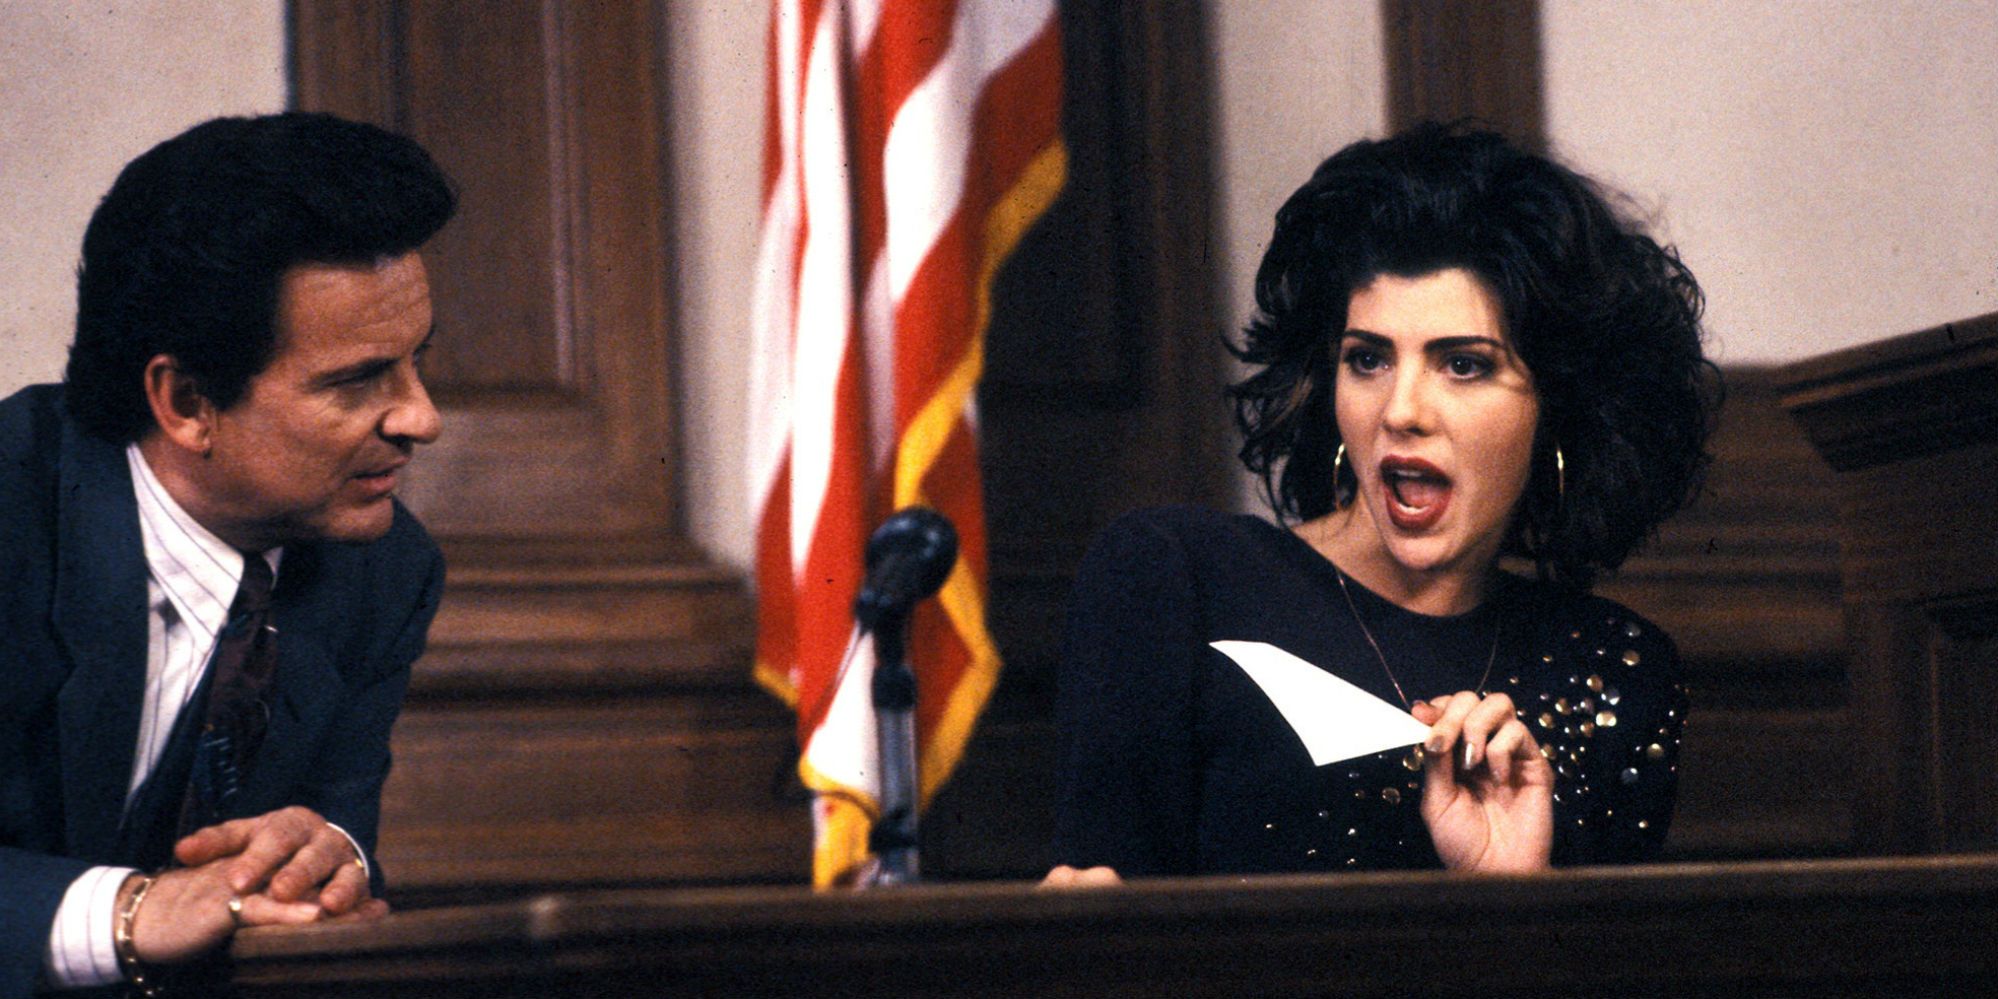 Joe Pesci and Marisa Tomei sit in court in My Cousin Vinny 